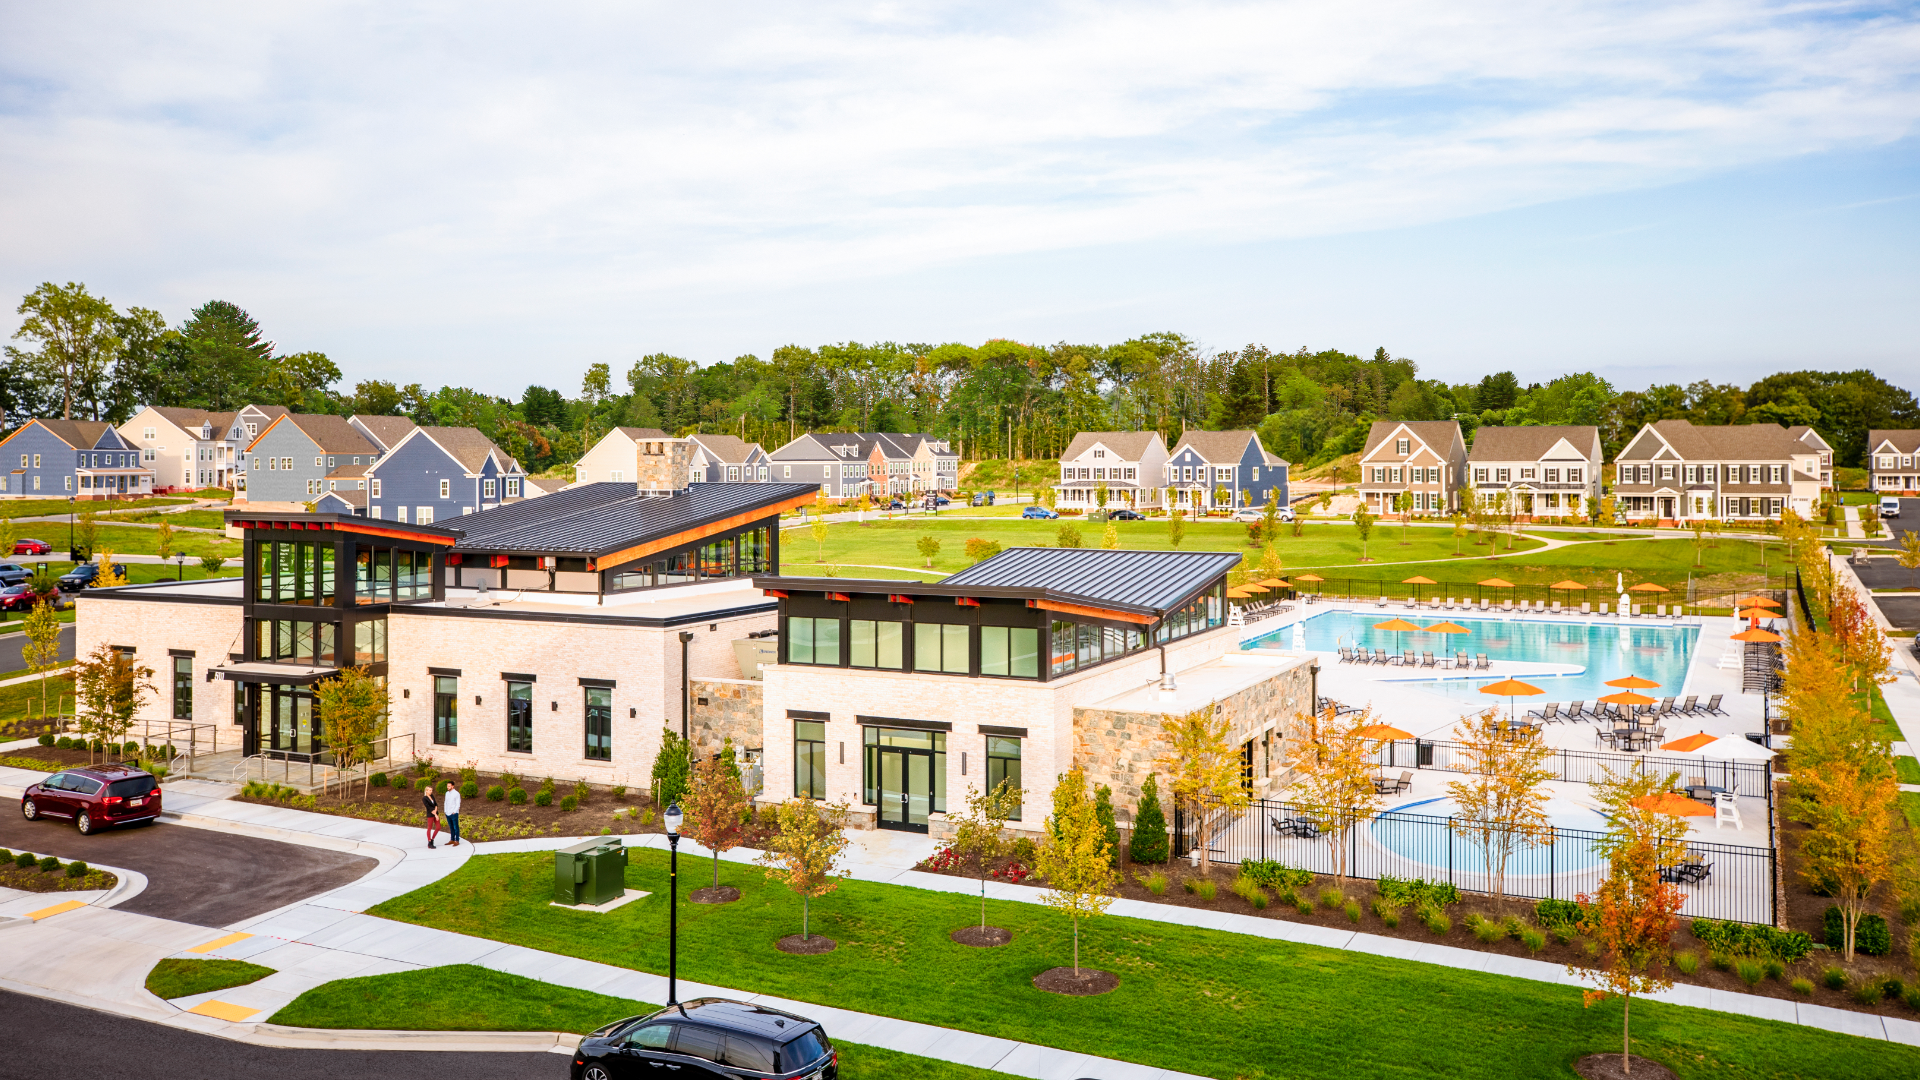 Greenleigh community clubhouse, pool and single-family homes